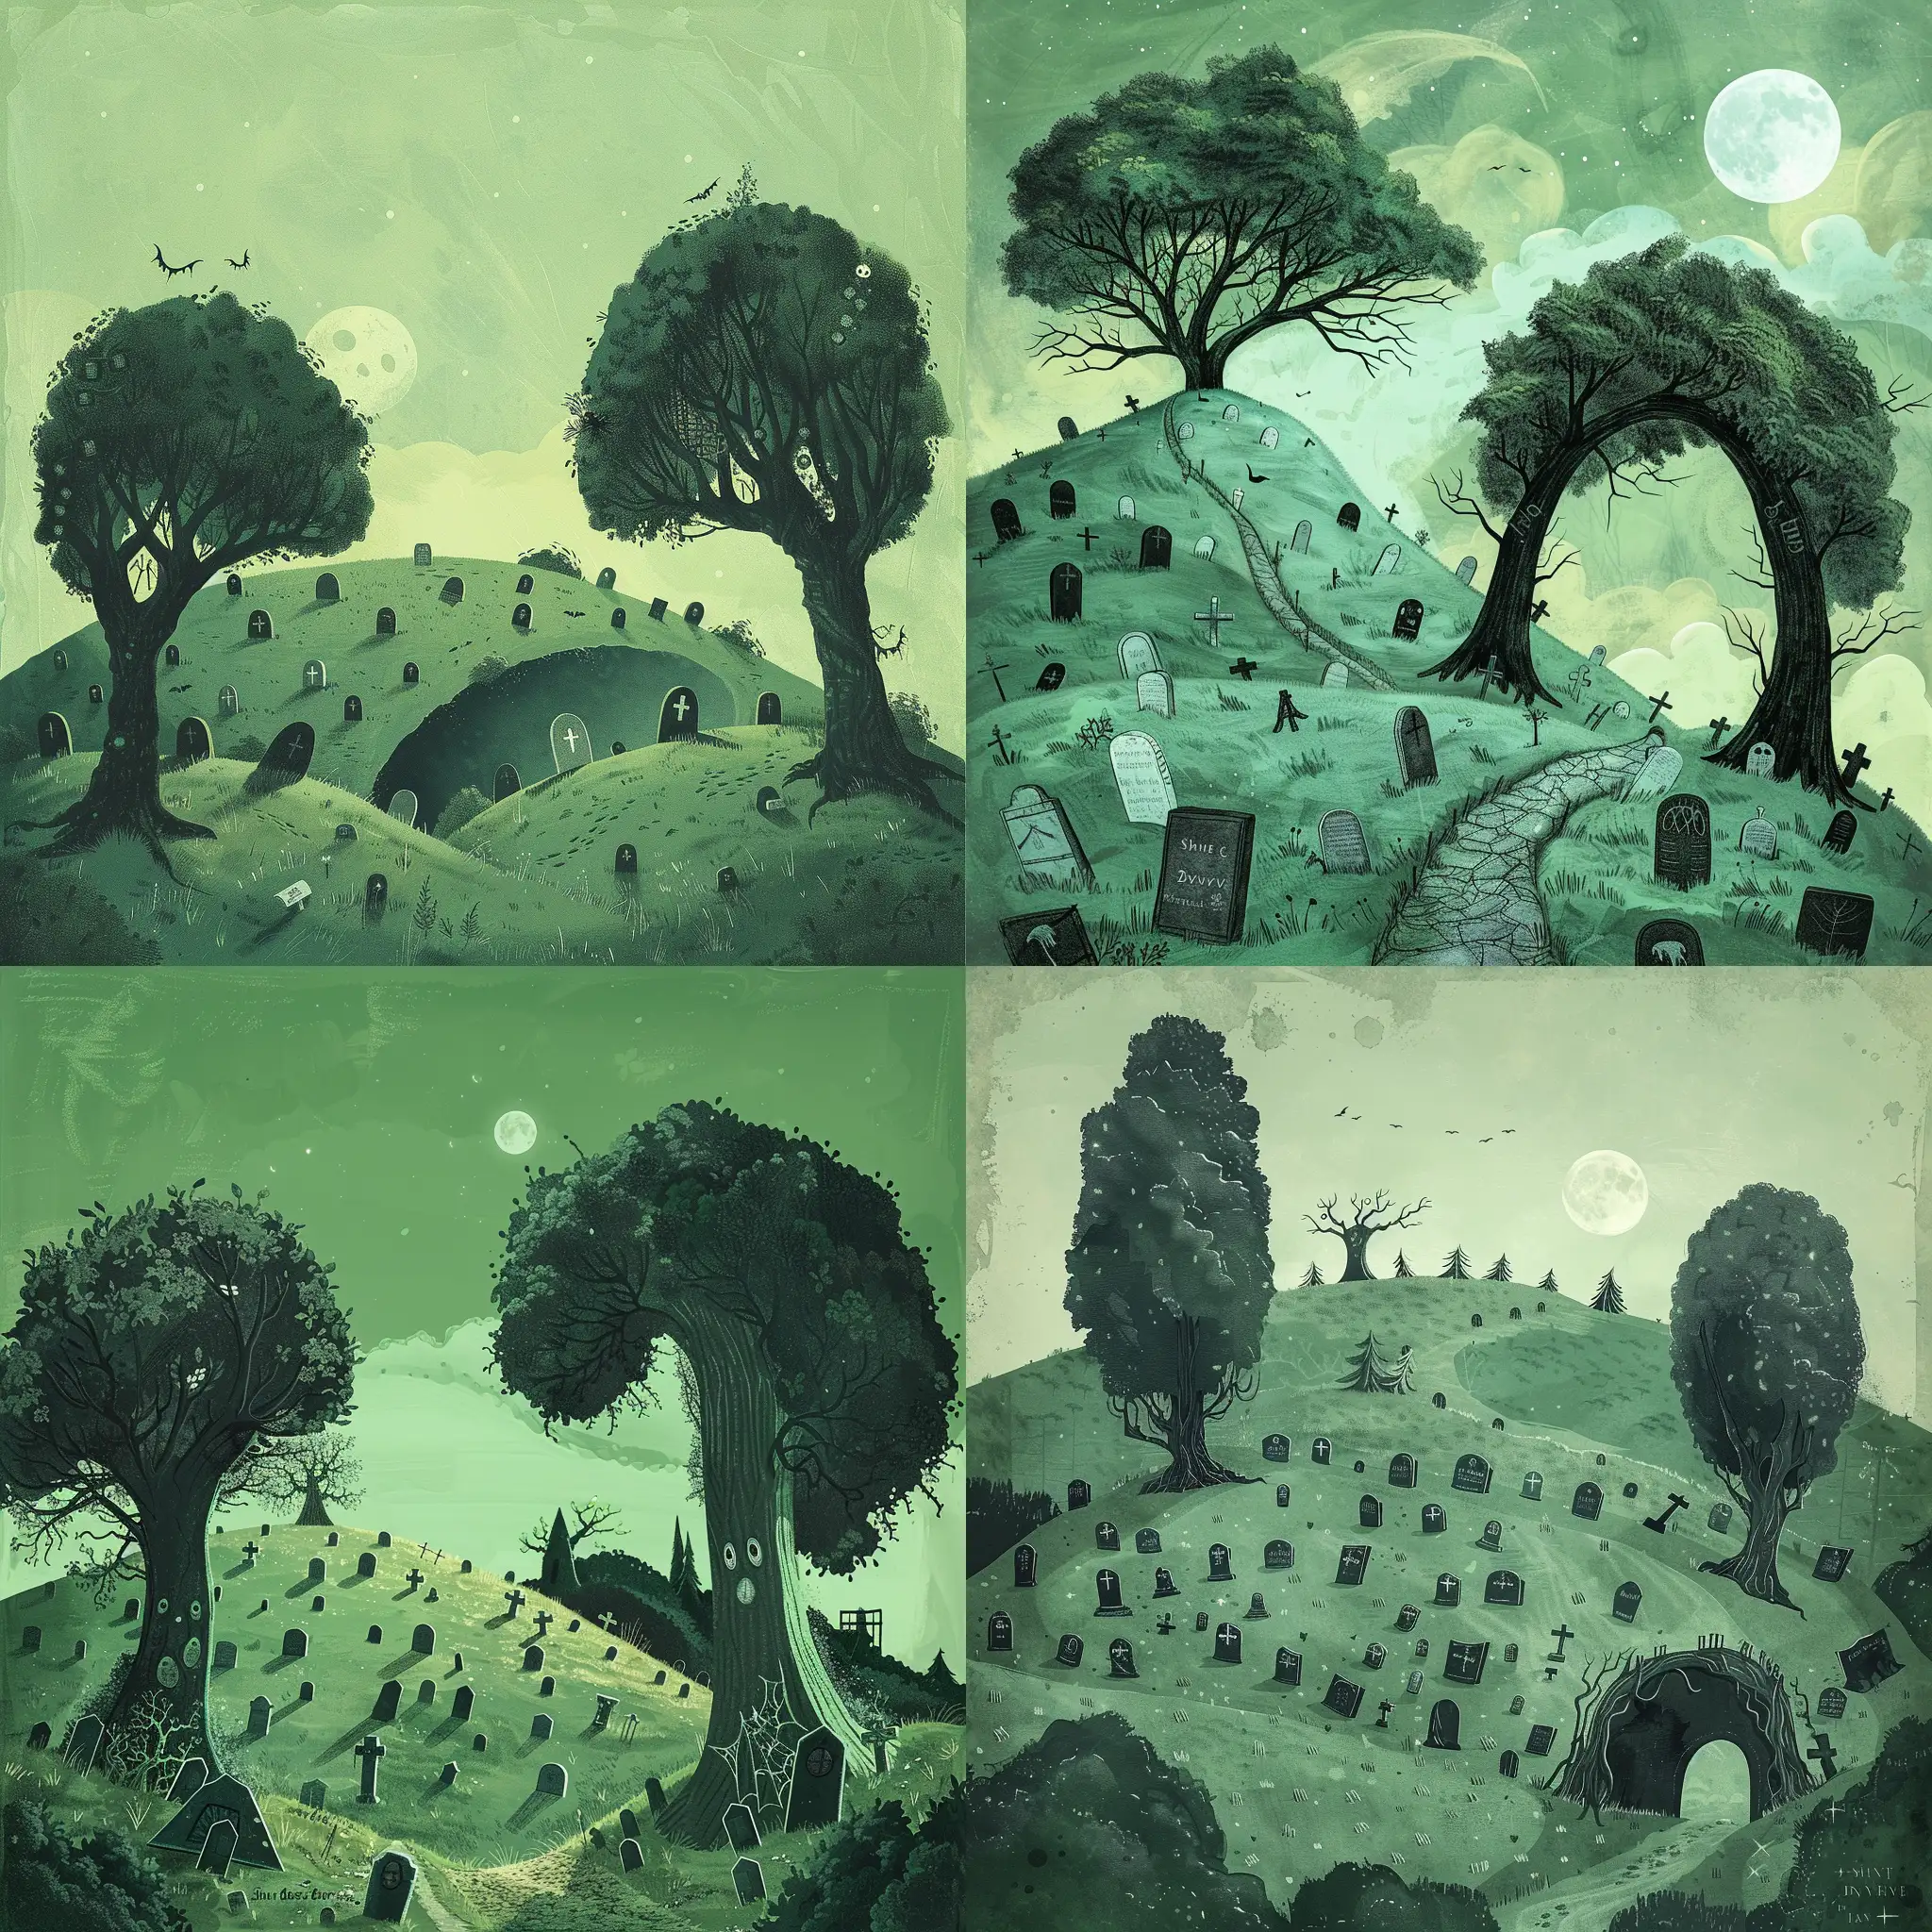 prompt, childrens book cover background only, front and back cover, one piece of art, spooky backdrop of rolling hills and a tree line, leading up to the tree line is a hill and on the hill are various gravestones littered around, in the midground on the right are two large creepy looking trees creating an archway, behind the two trees is a full moon, the colour of the book cover is made up of green, the feel of the image should be painterly, artwork in the style of Shane Devries illustrations.